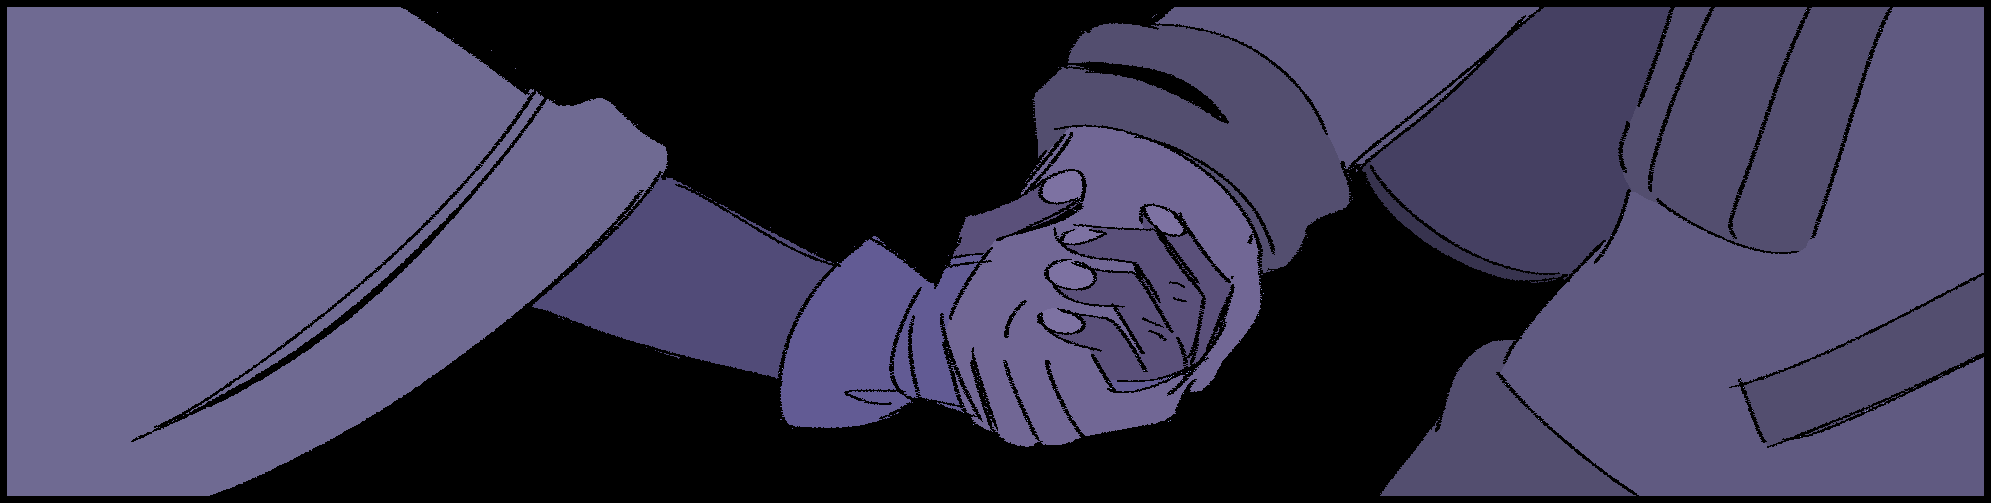 A drawing of Sol and Nyx's hands clasped together as Sol leads Nyx into the night.